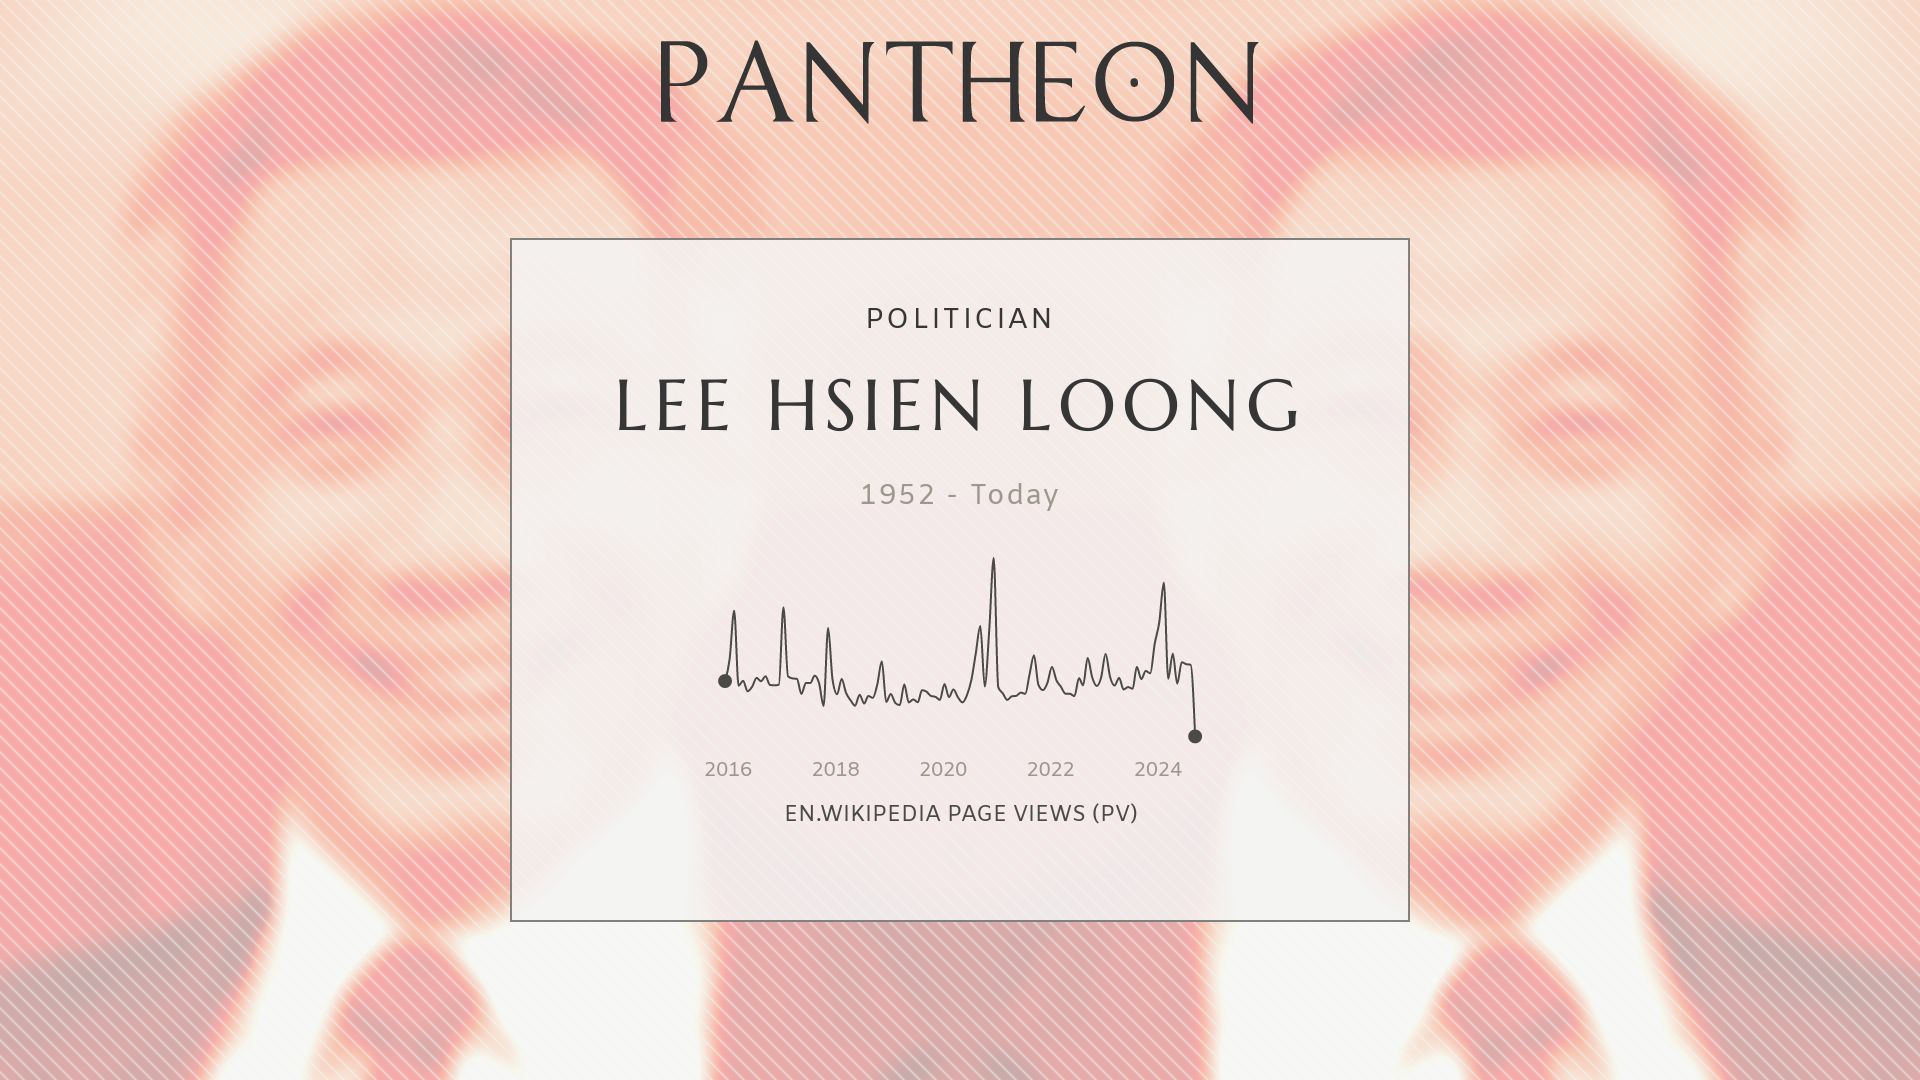 Lee Hsien Loong Biography - 3rd Prime Minister of Singapore since 2004